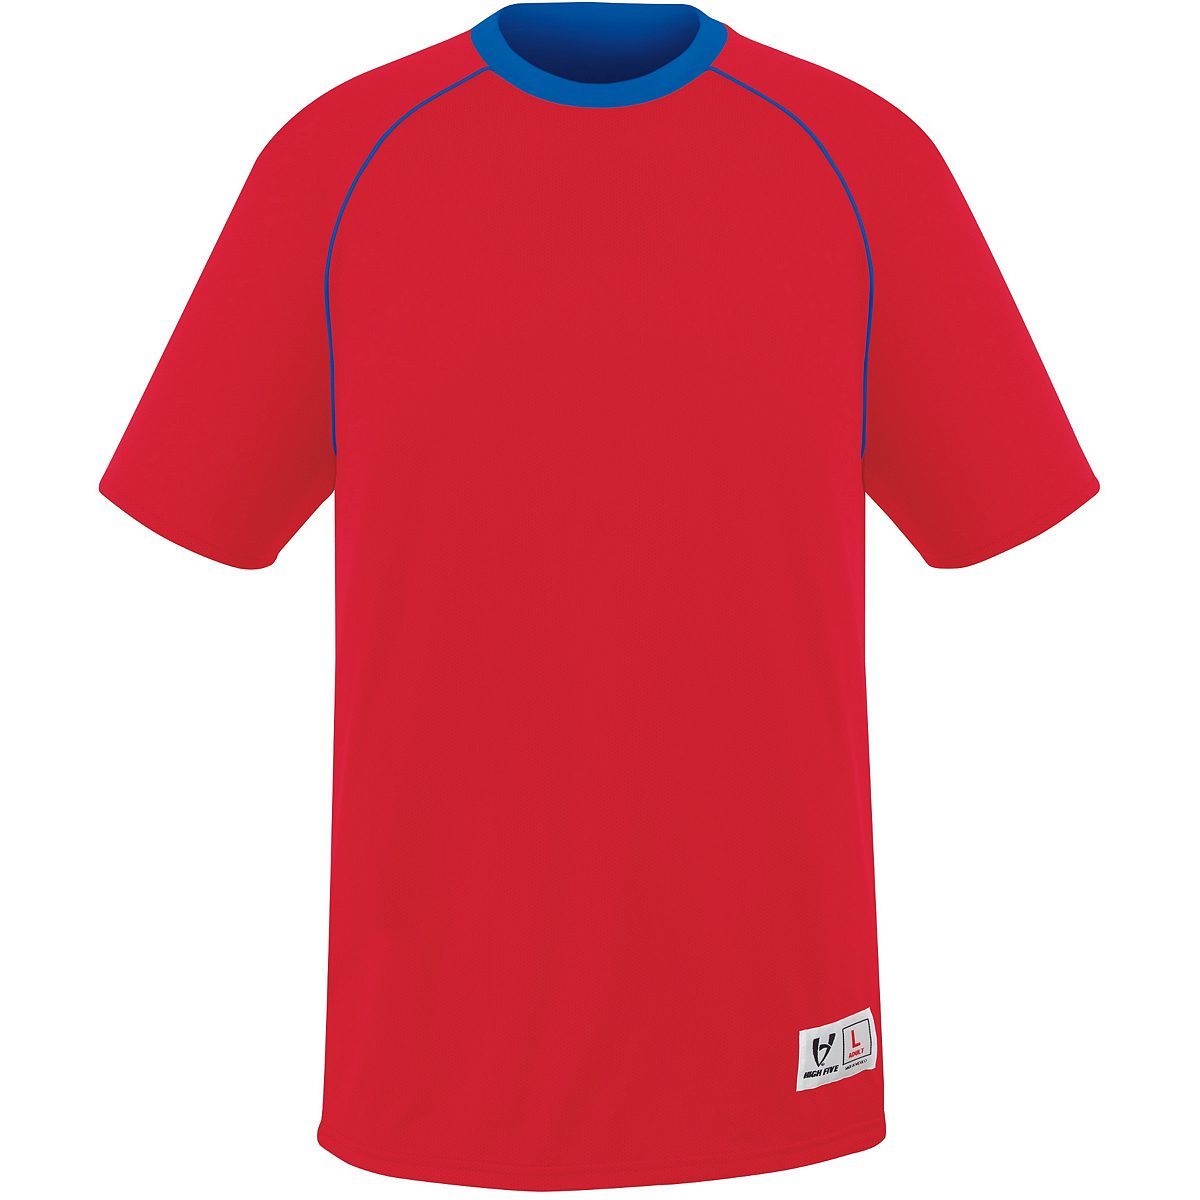 High 5 Youth Conversion Reversible Jersey in Scarlet/Royal  -Part of the Youth, Youth-Jersey, High5-Products, Soccer, Shirts, All-Sports-1 product lines at KanaleyCreations.com